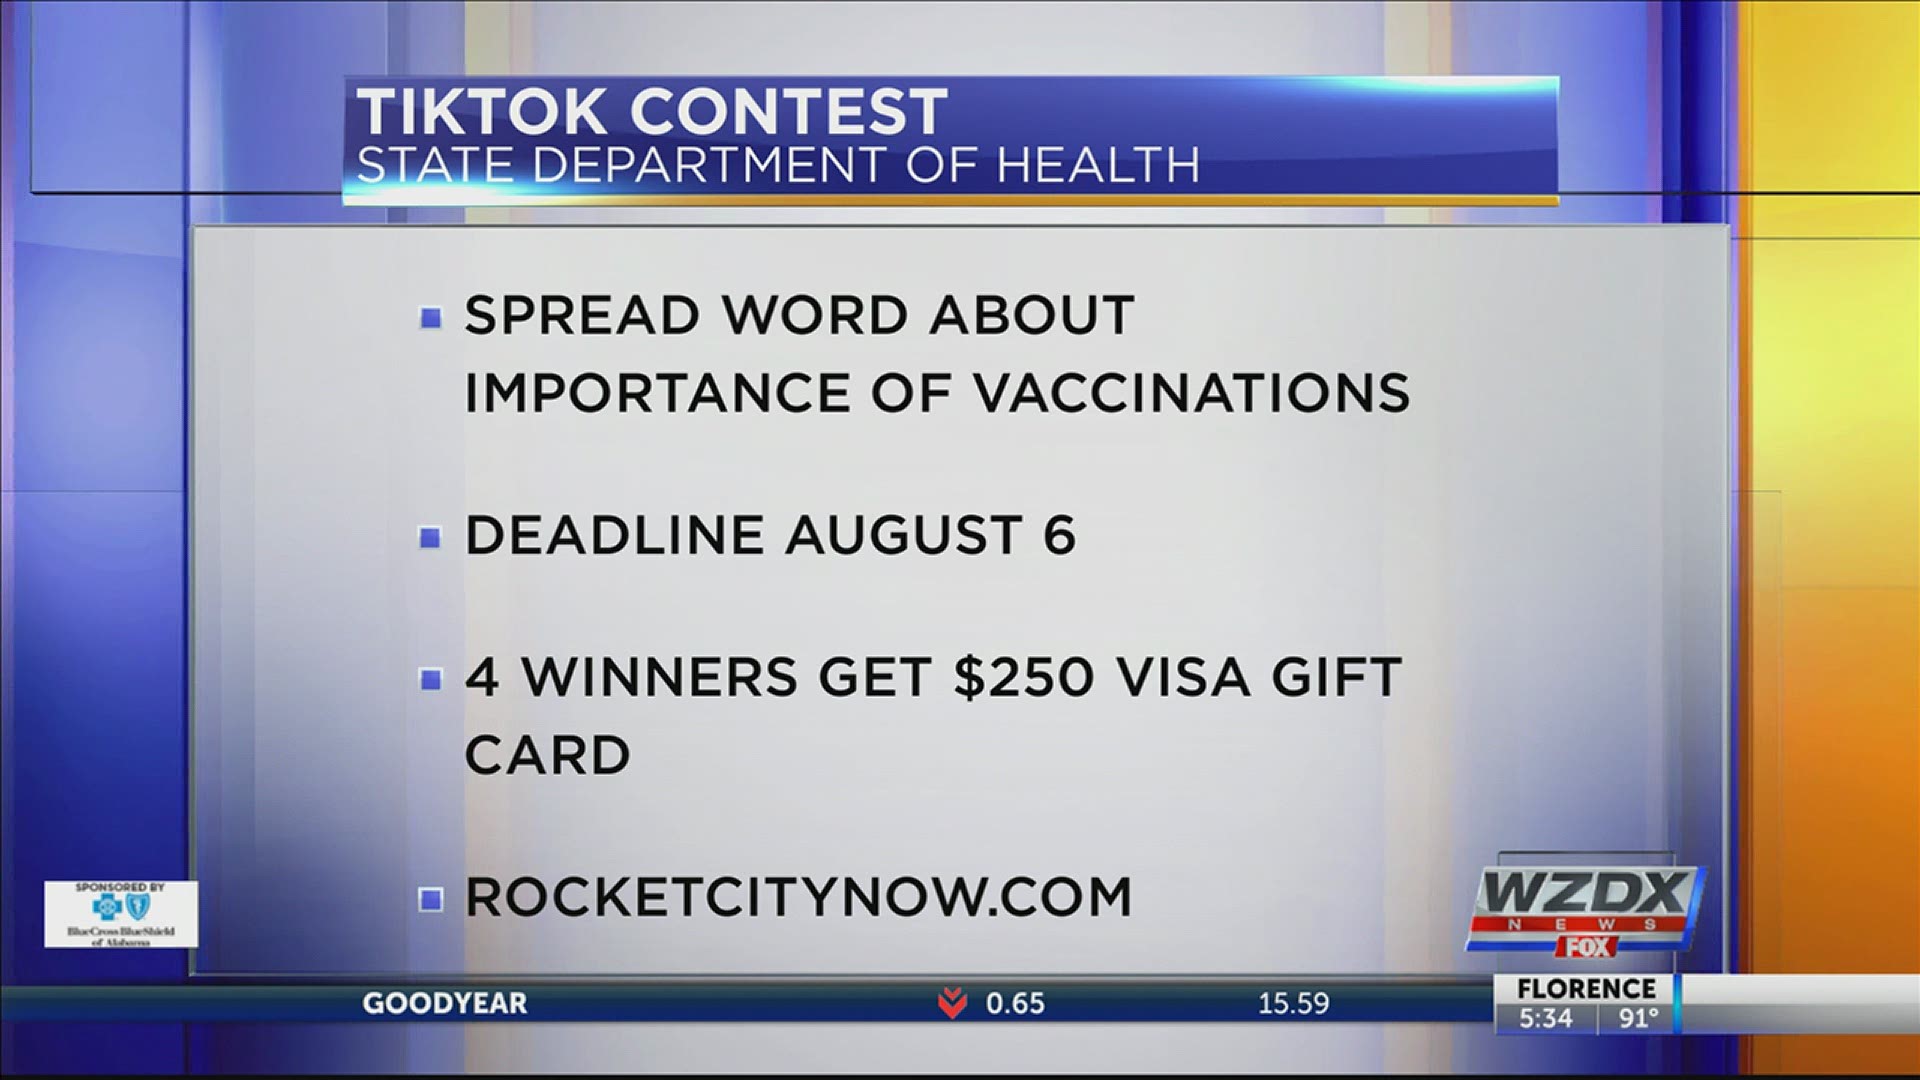 Your TikTok talent could help you win $250 from the Alabama Dept. of Public Health.